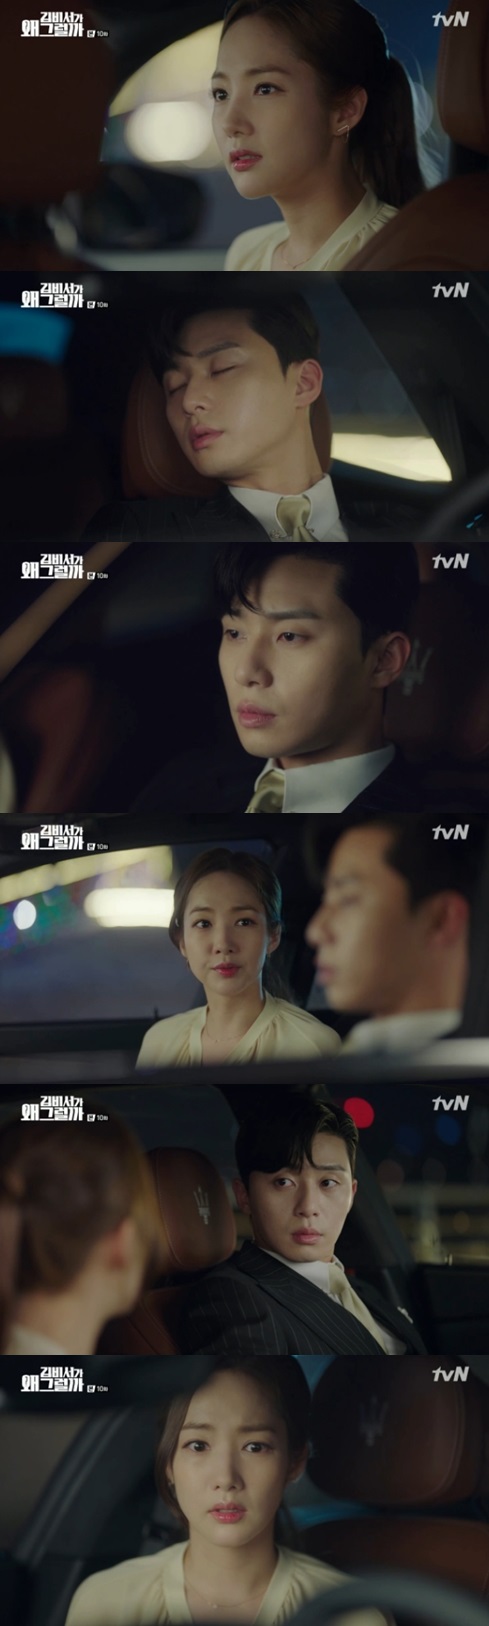 Why would Kimbi do that? Actor Park Seo-joon has avoided Park Min-youngs questioning.In the 10th episode of the cable channel tvN drama Why is Kimbi Seo? (played by Baek Sun-woo, director Park Joon-hwa), which was broadcast on the 5th night, Kim Mi-so was shown suspecting that his brother, who was looking for him in the past, was Lee Yeongjun (Park Seo-joon).Kim Mi-so cautiously called Lee Yeongjun, who is sleeping, Sung Hyuns brother, and Lee Yeongjun unconsciously replied, Why.Kim Mi-so asked, Have you changed your name, Mr. Vice Chairman? Was your old name Lee Sung-hyun?Lee Yeongjun denied, I do not know what to say, but Kim Mi-so said, I heard clearly that my wife said our prefecture when she told me about the kidnapping last time.Lee Yeongjun then replied, Do not Buyeo, which means too much to sleep, just because I heard Kimbi in my sleep, I answered habitually.